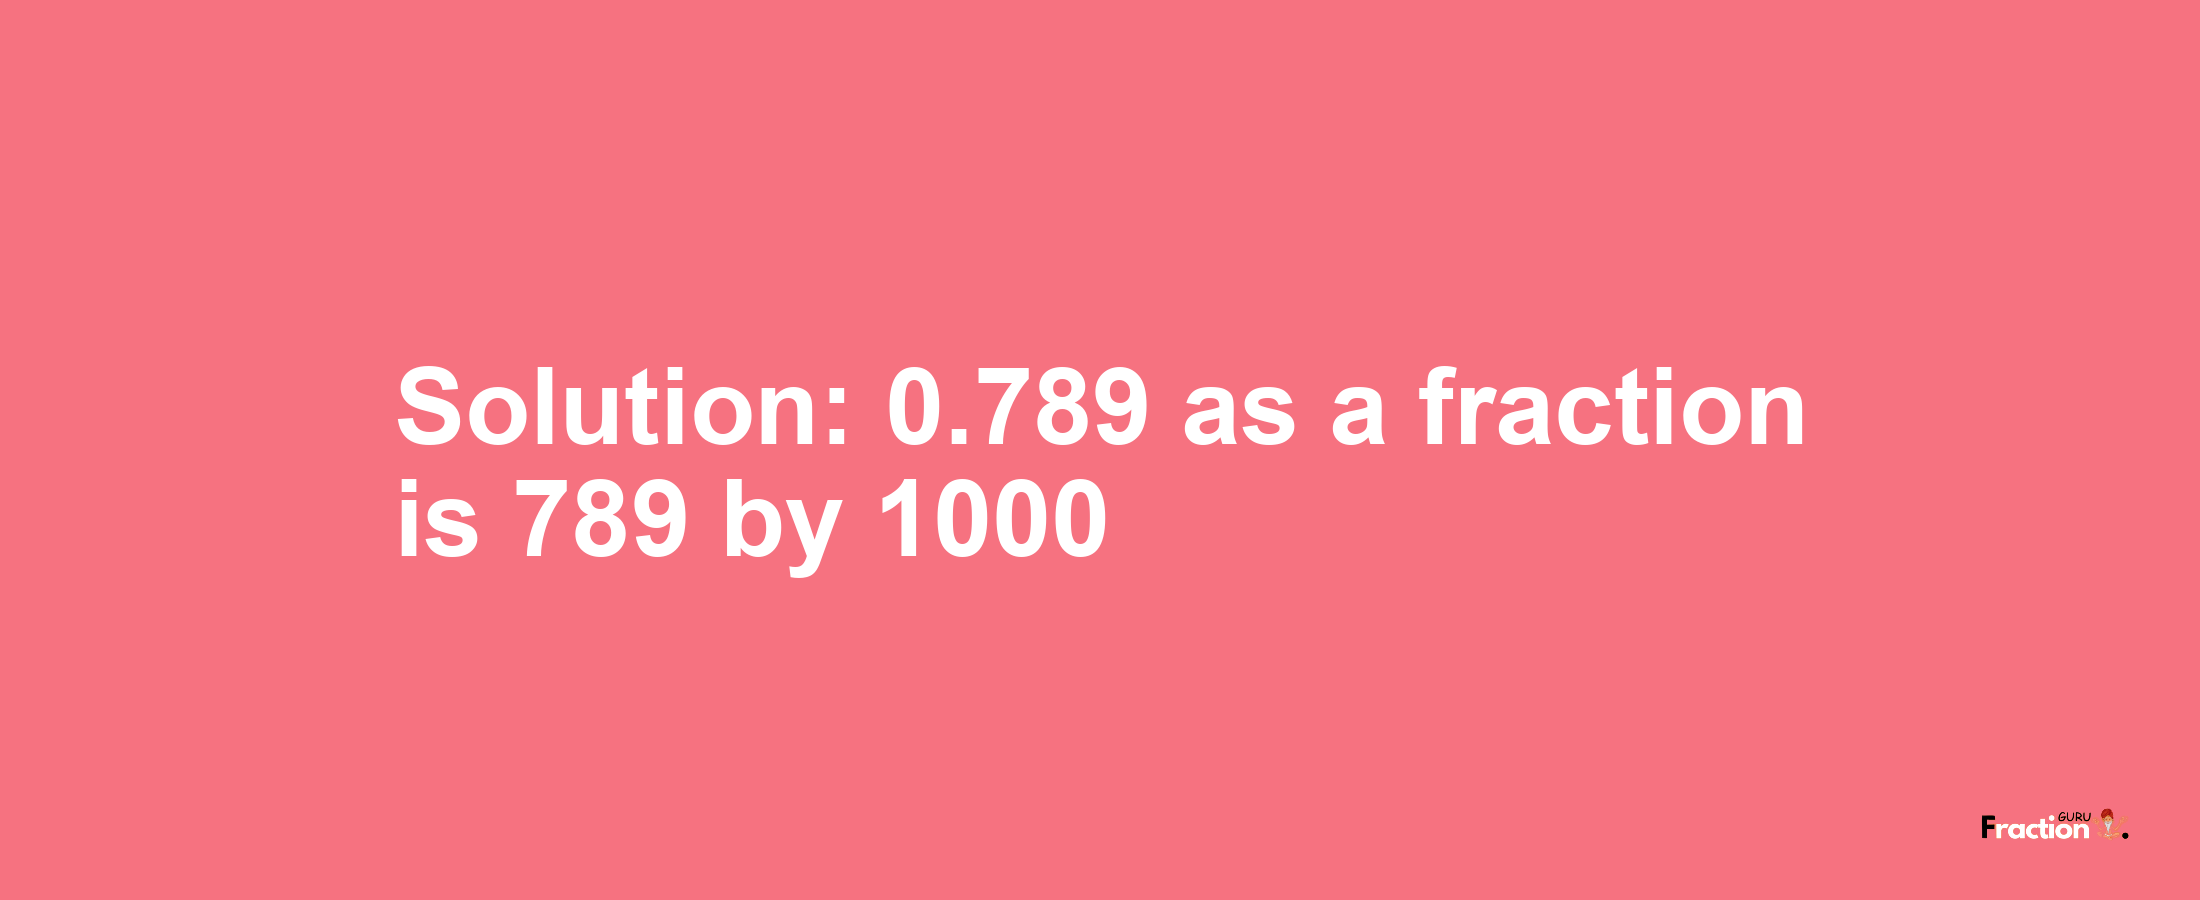 Solution:0.789 as a fraction is 789/1000